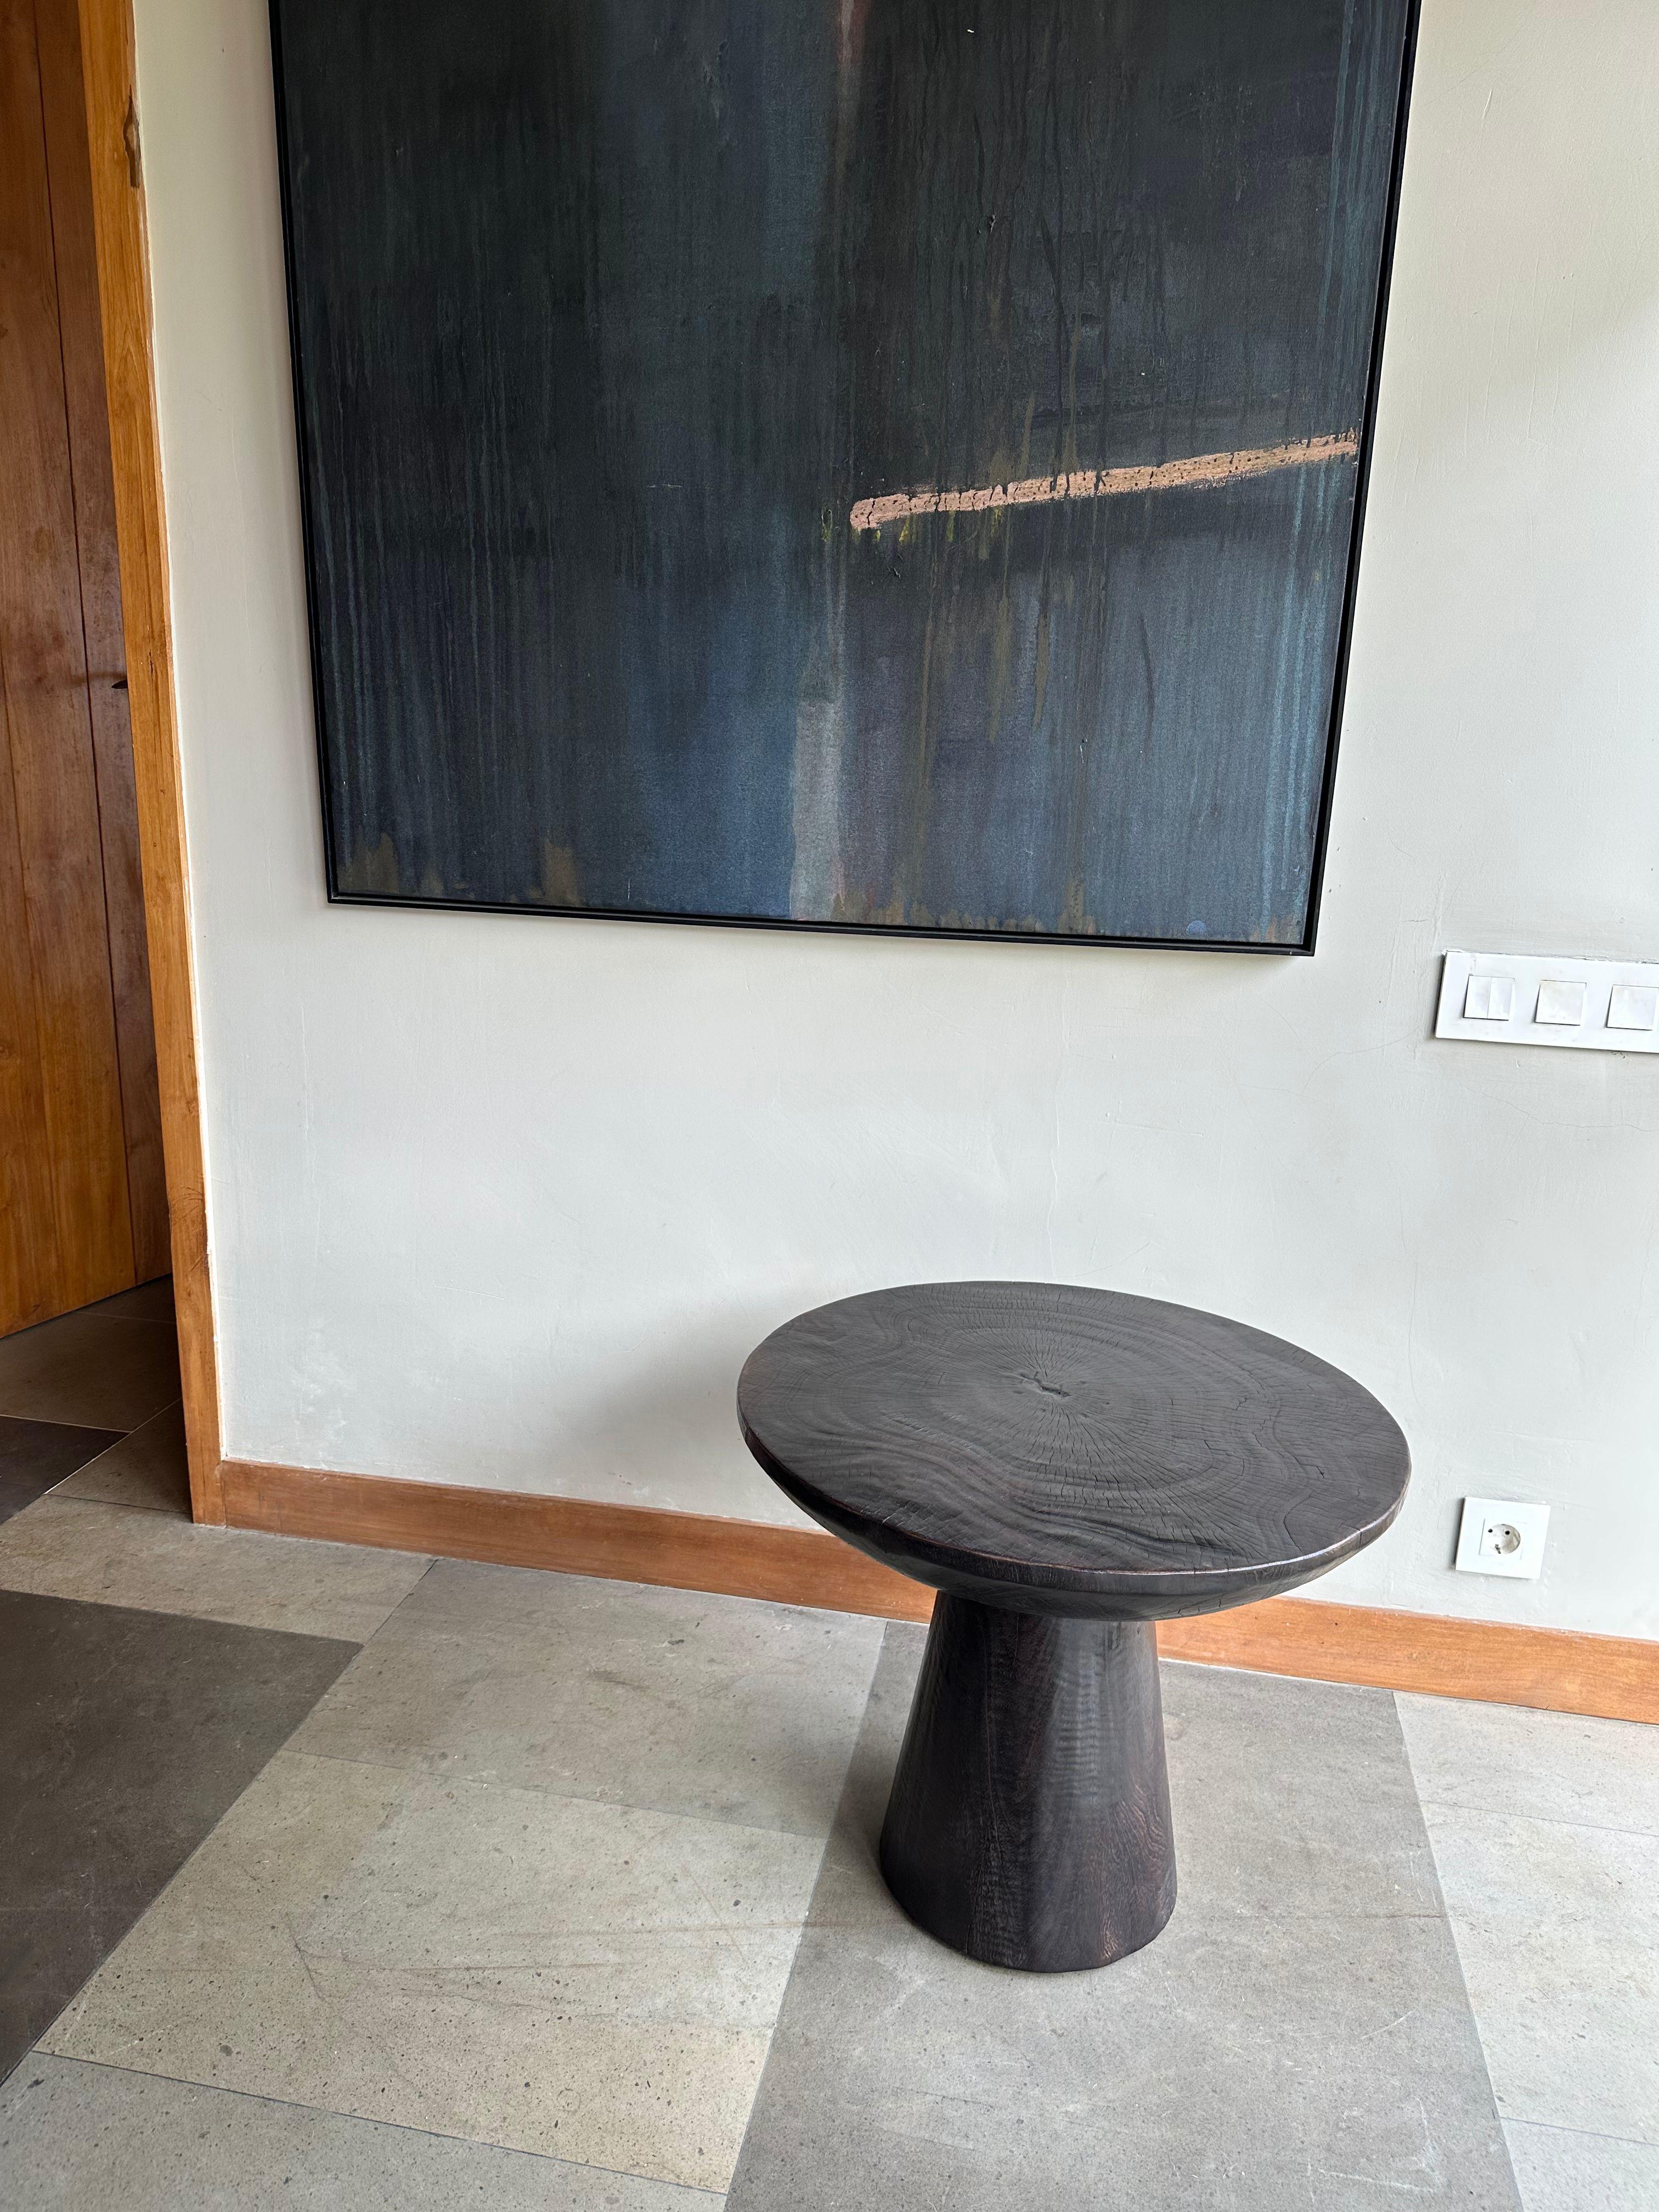 A wonderfully organic round side table. Its pigment was achieved through burning the wood multiple times and finished with a clear coat. Its neutral pigment and subtle wood texture makes it perfect for any space. This table was crafted from mango